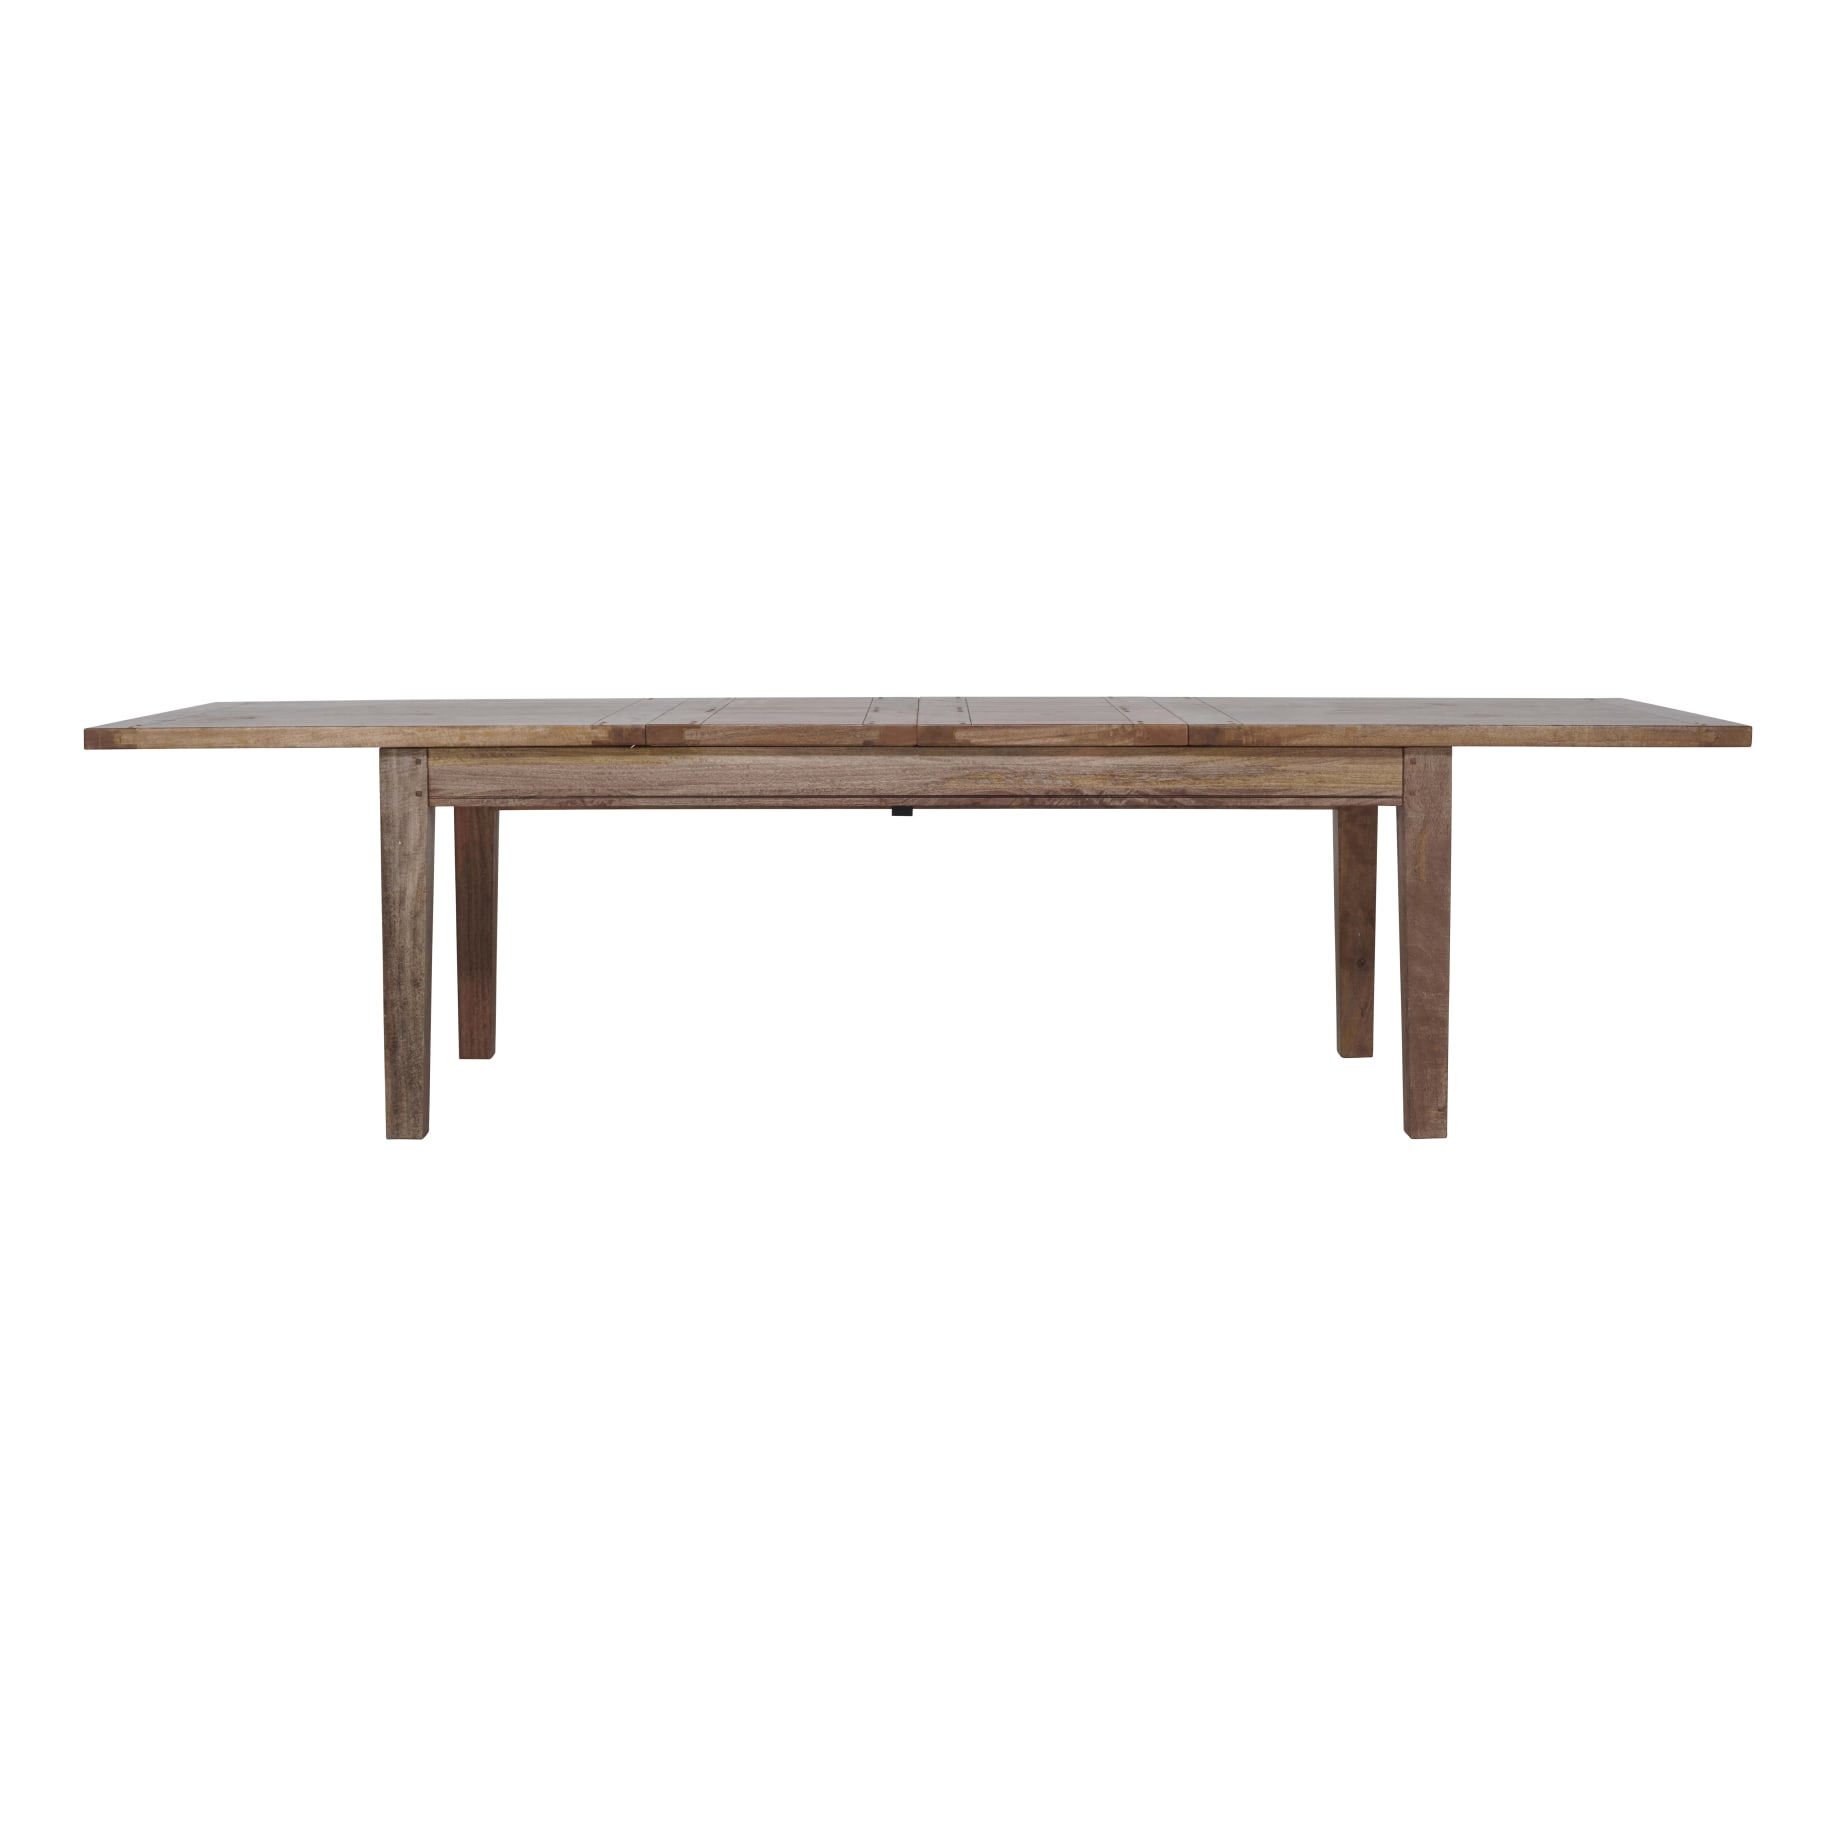 Mango Creek Extension Dining Table 210-310cm in Clear Lacquer